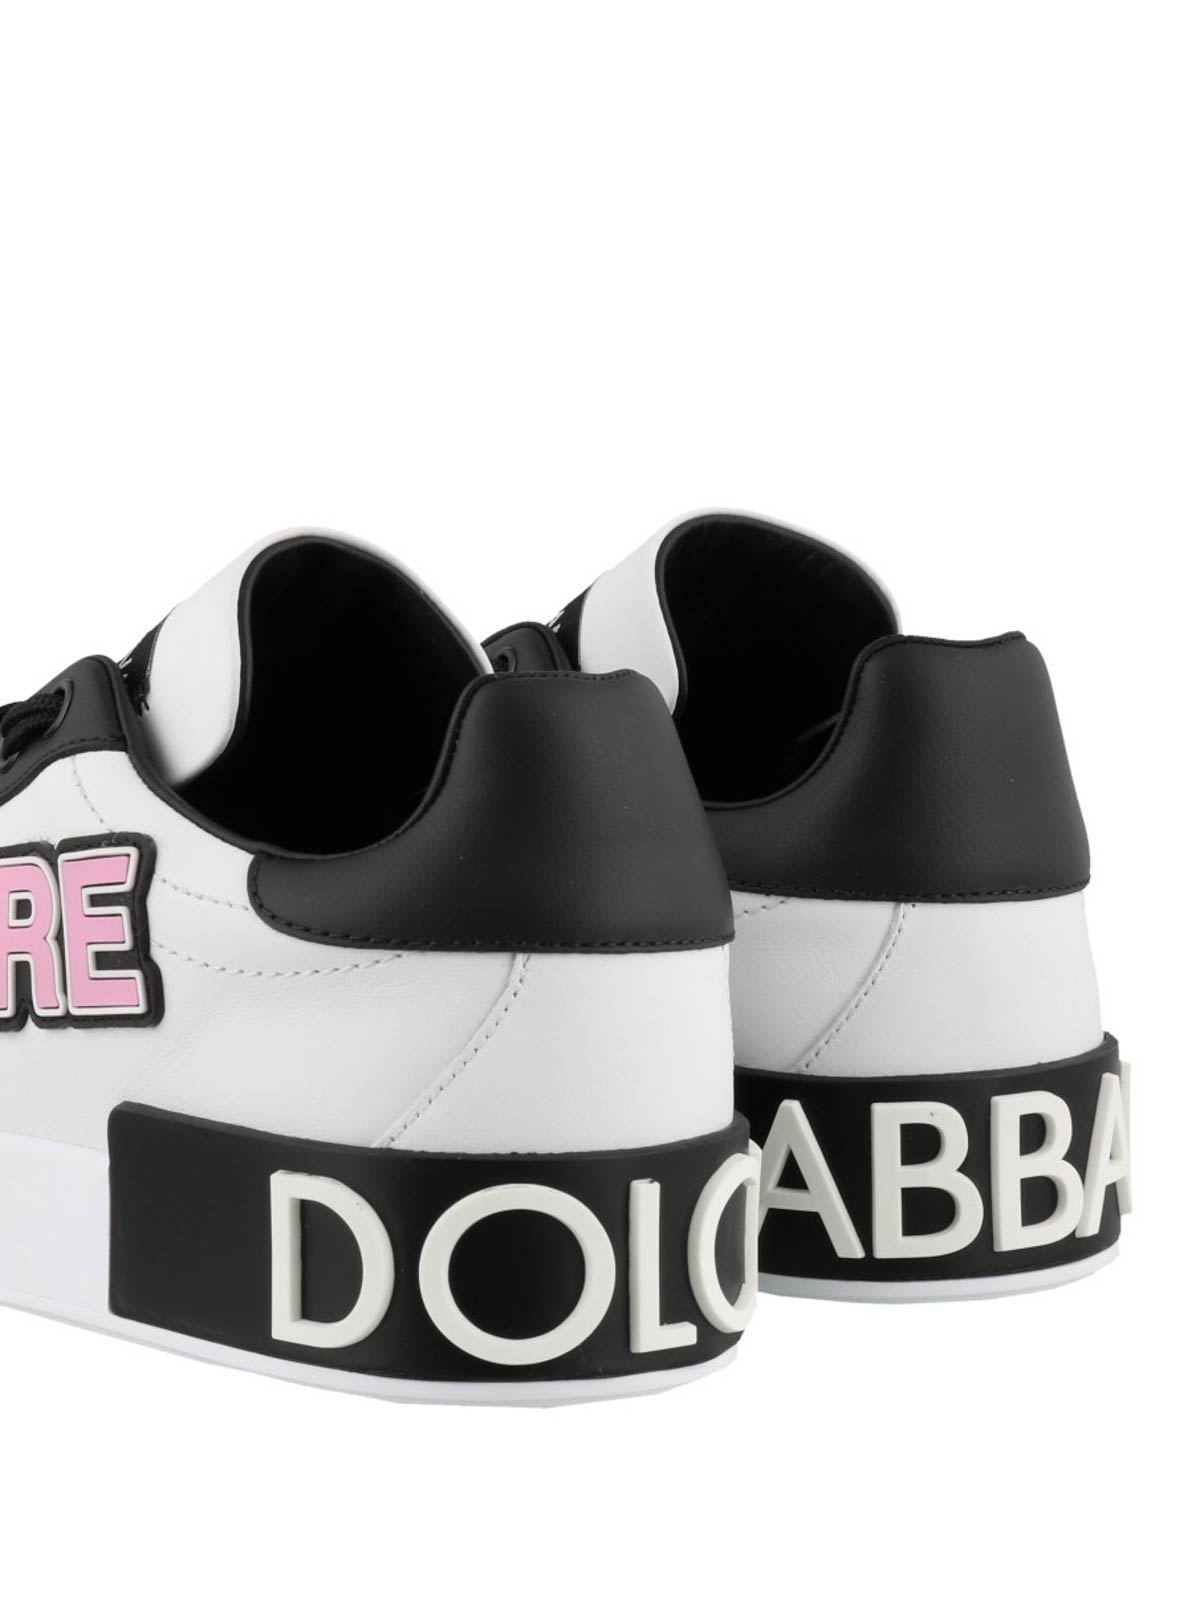 dolce and gabbana amore sneakers